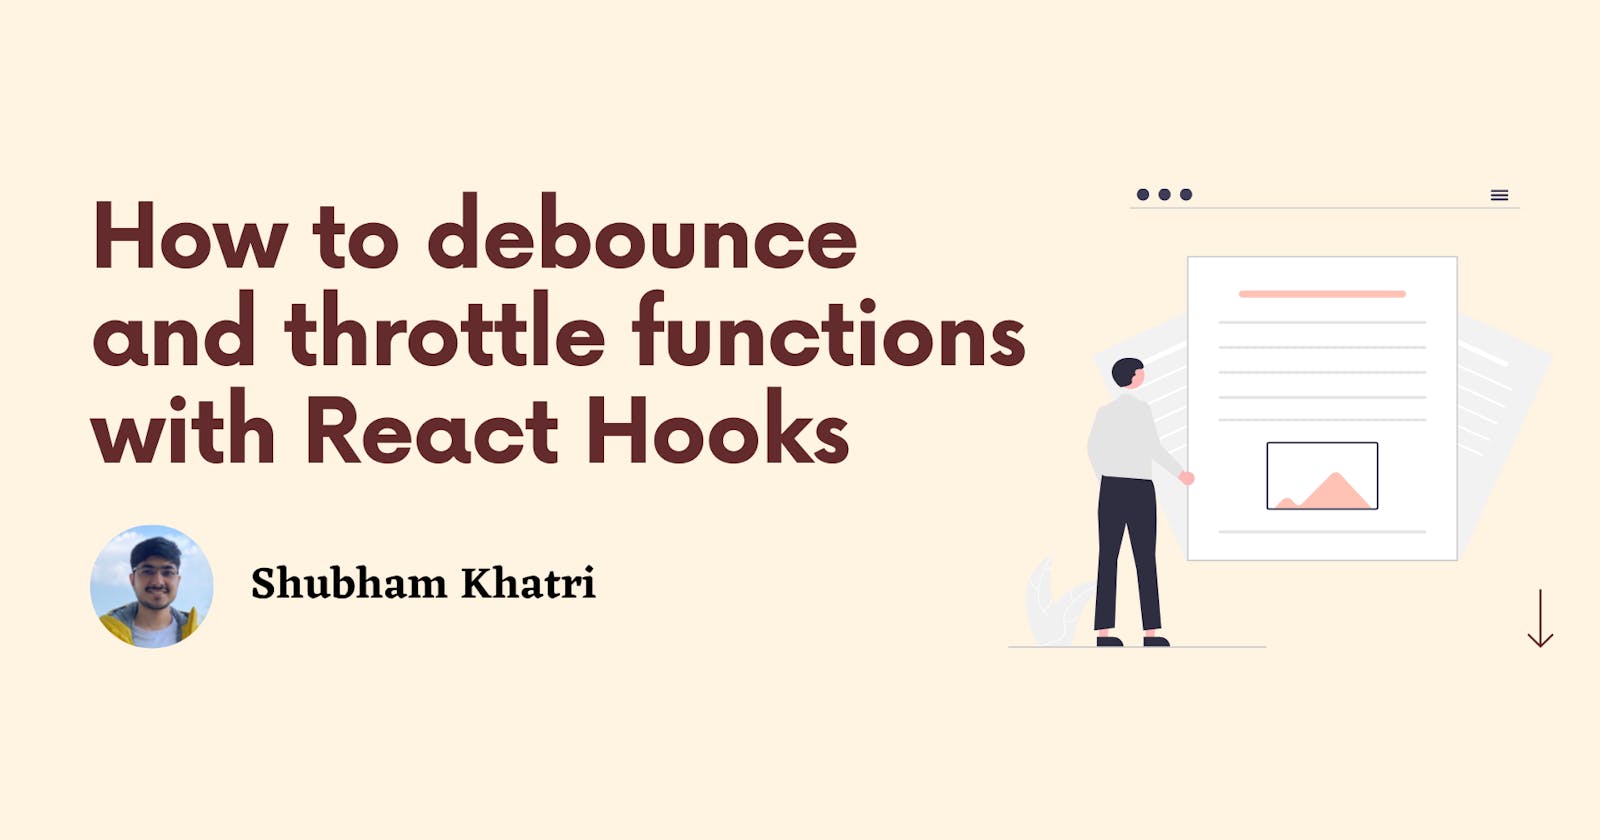 How to debounce and throttle functions with React hooks